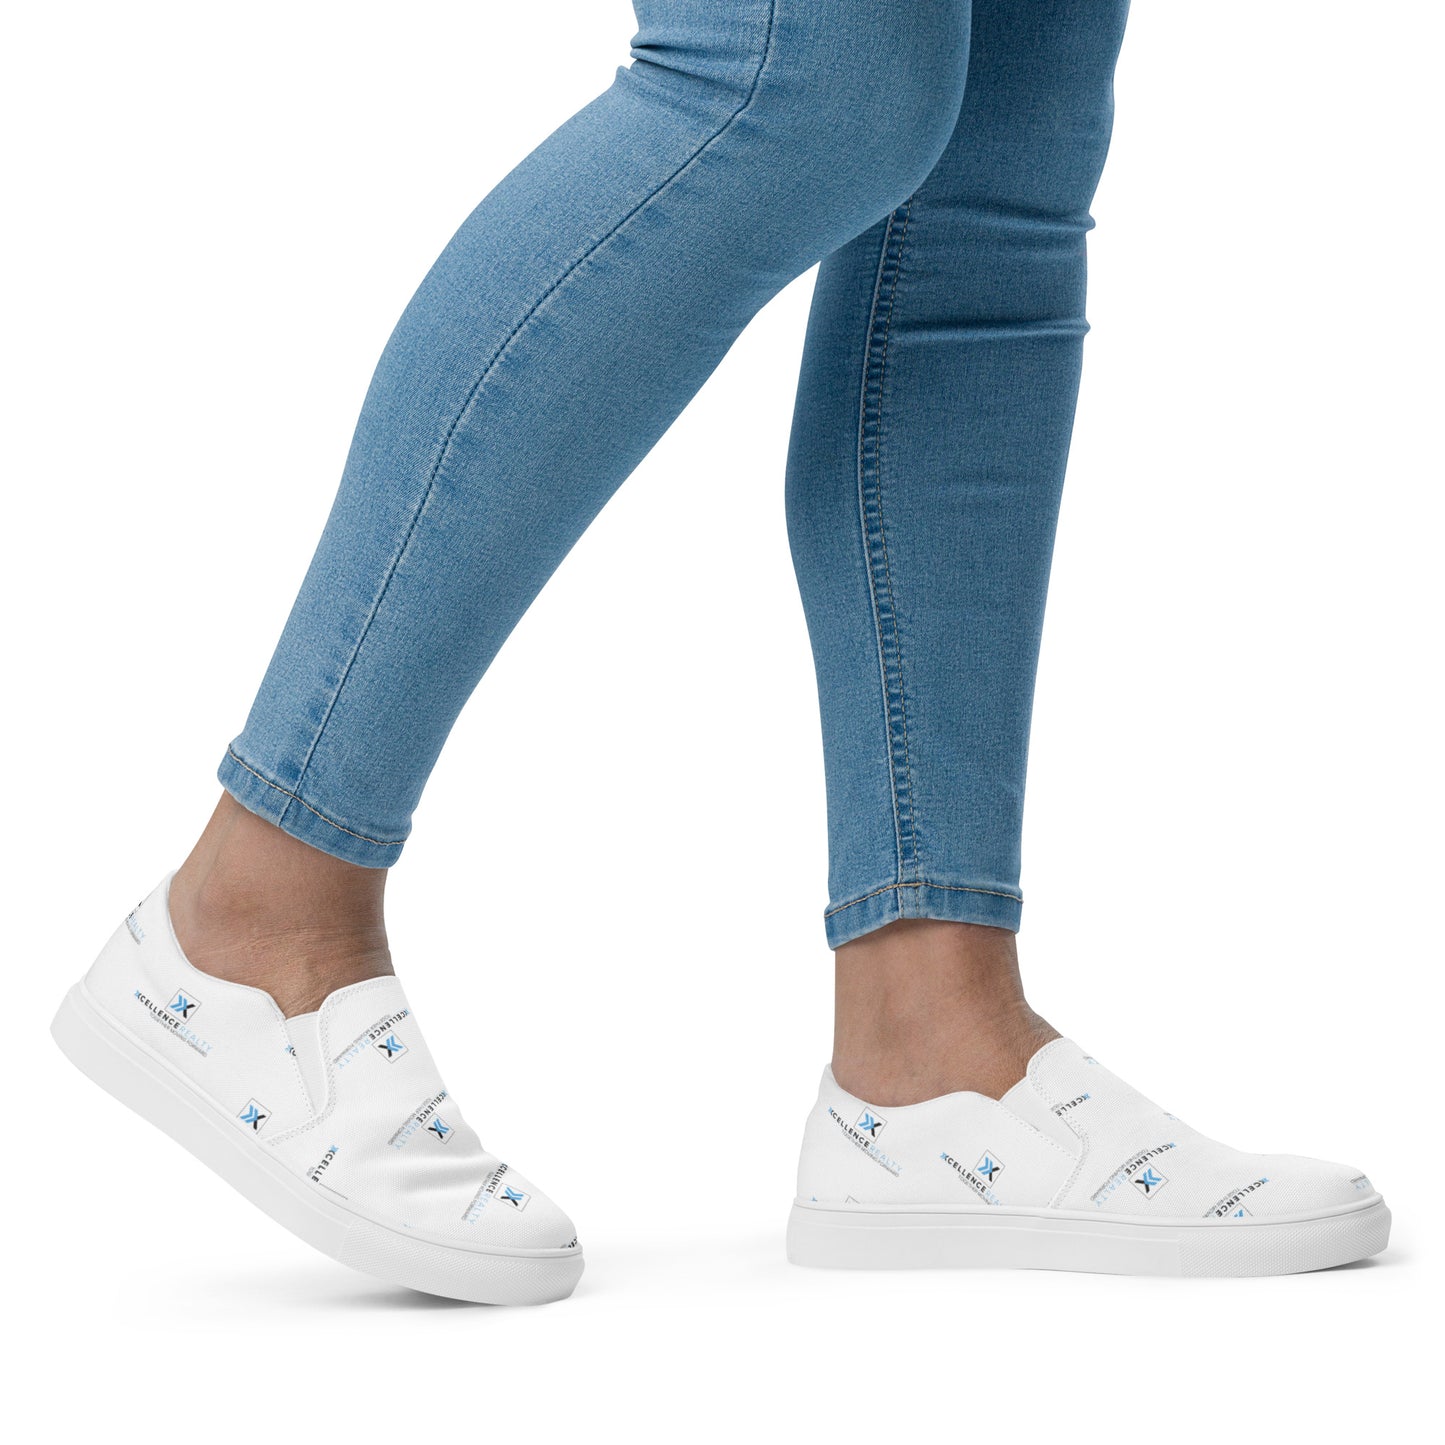 Women’s Slip-On Canvas Shoes | The Xcellence Classic